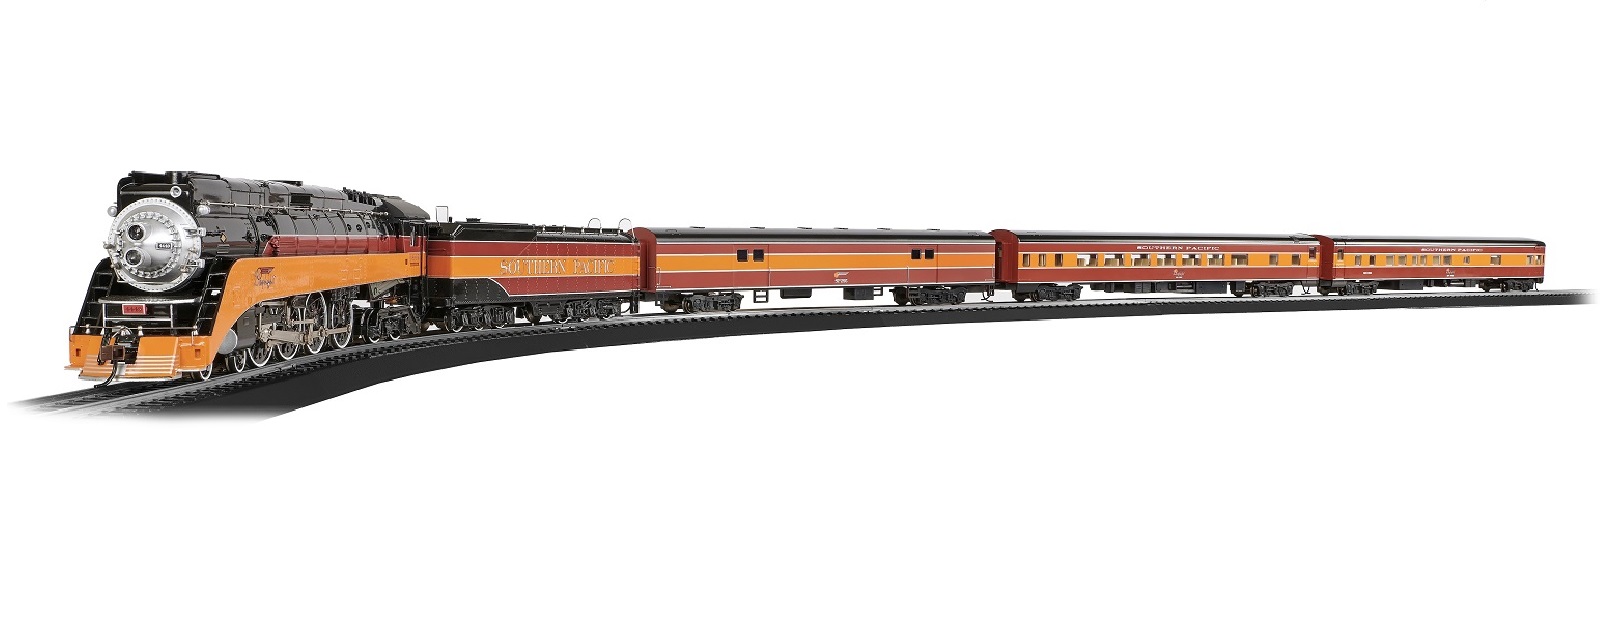 Bachmann Daylight Special Train Set, HO Scale. There are few